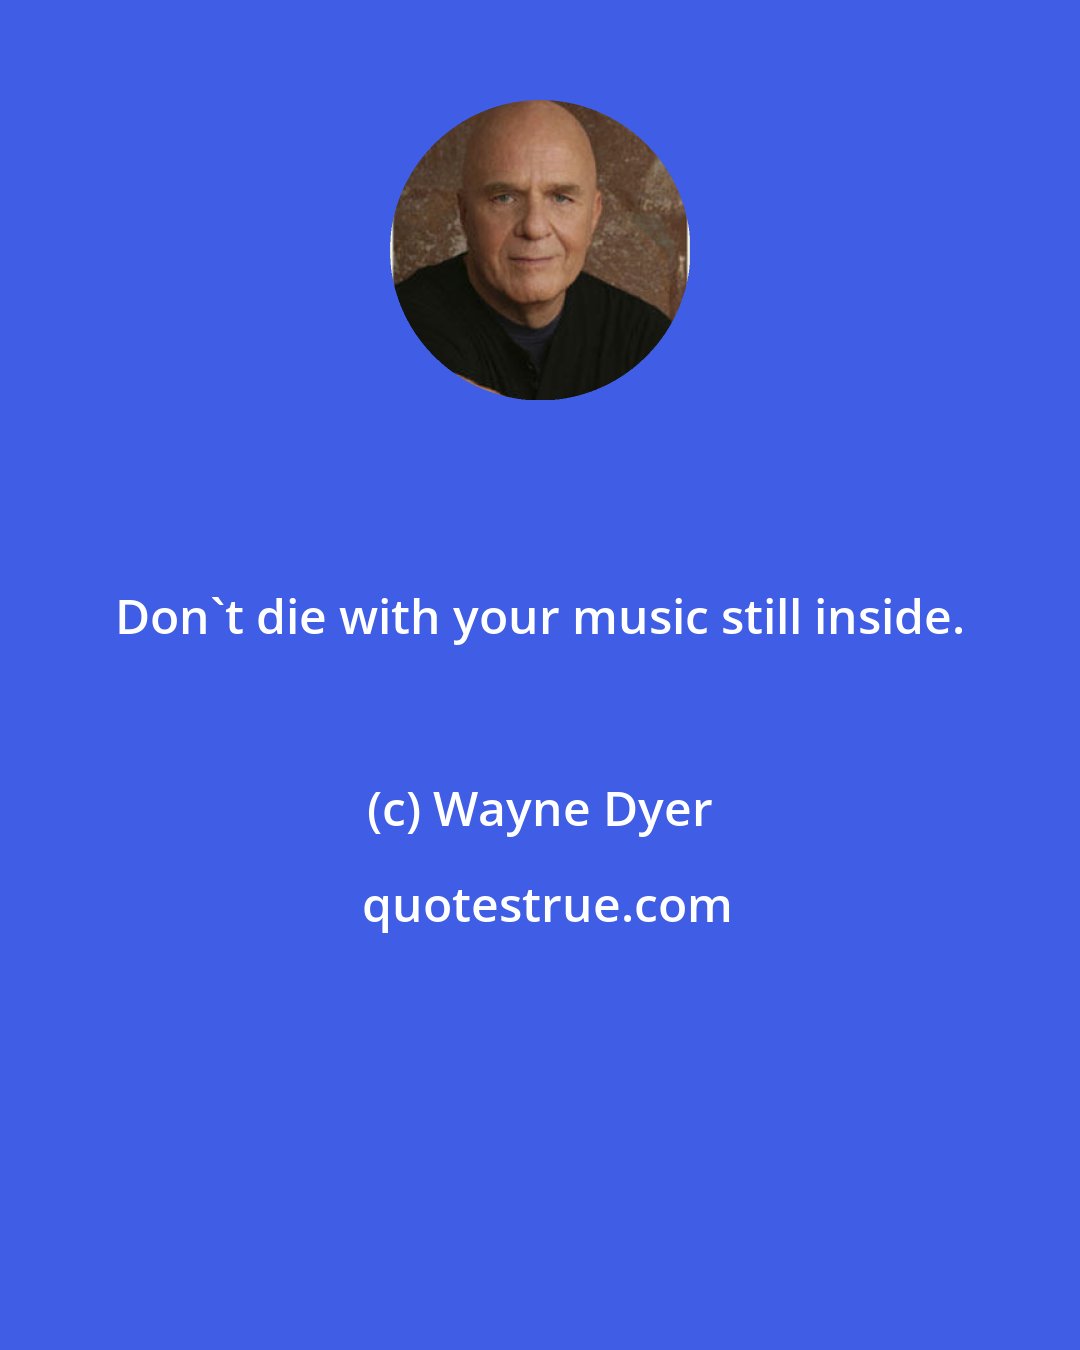 Wayne Dyer: Don't die with your music still inside.